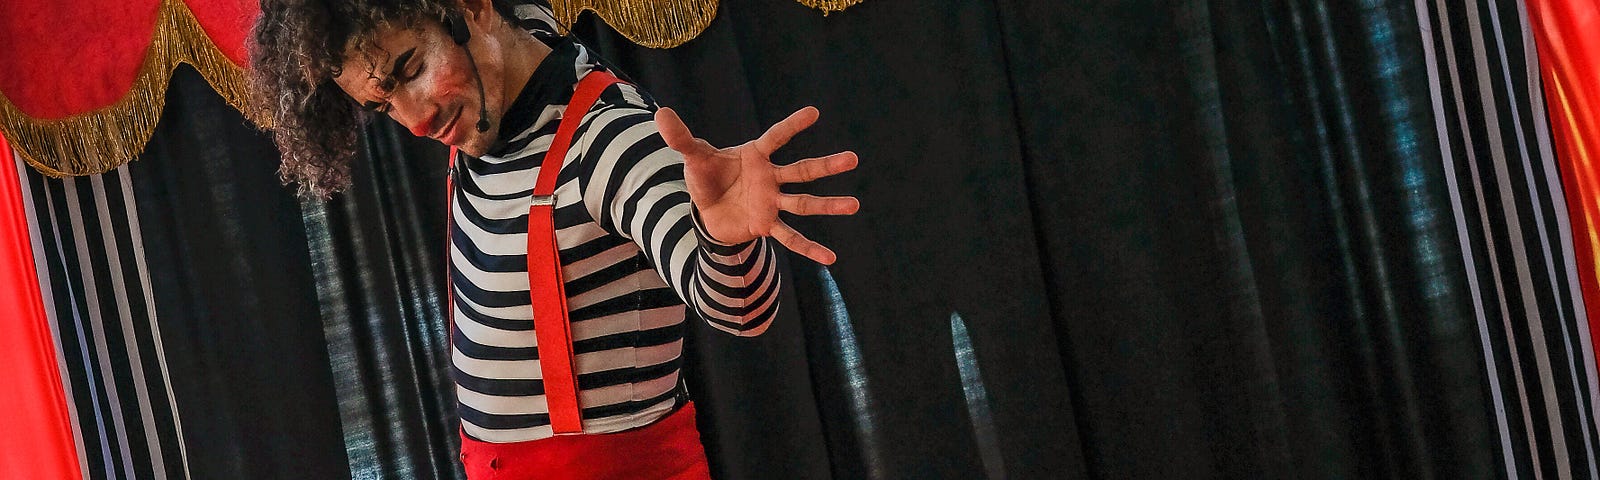 clown in red pants on a stage with red curtains